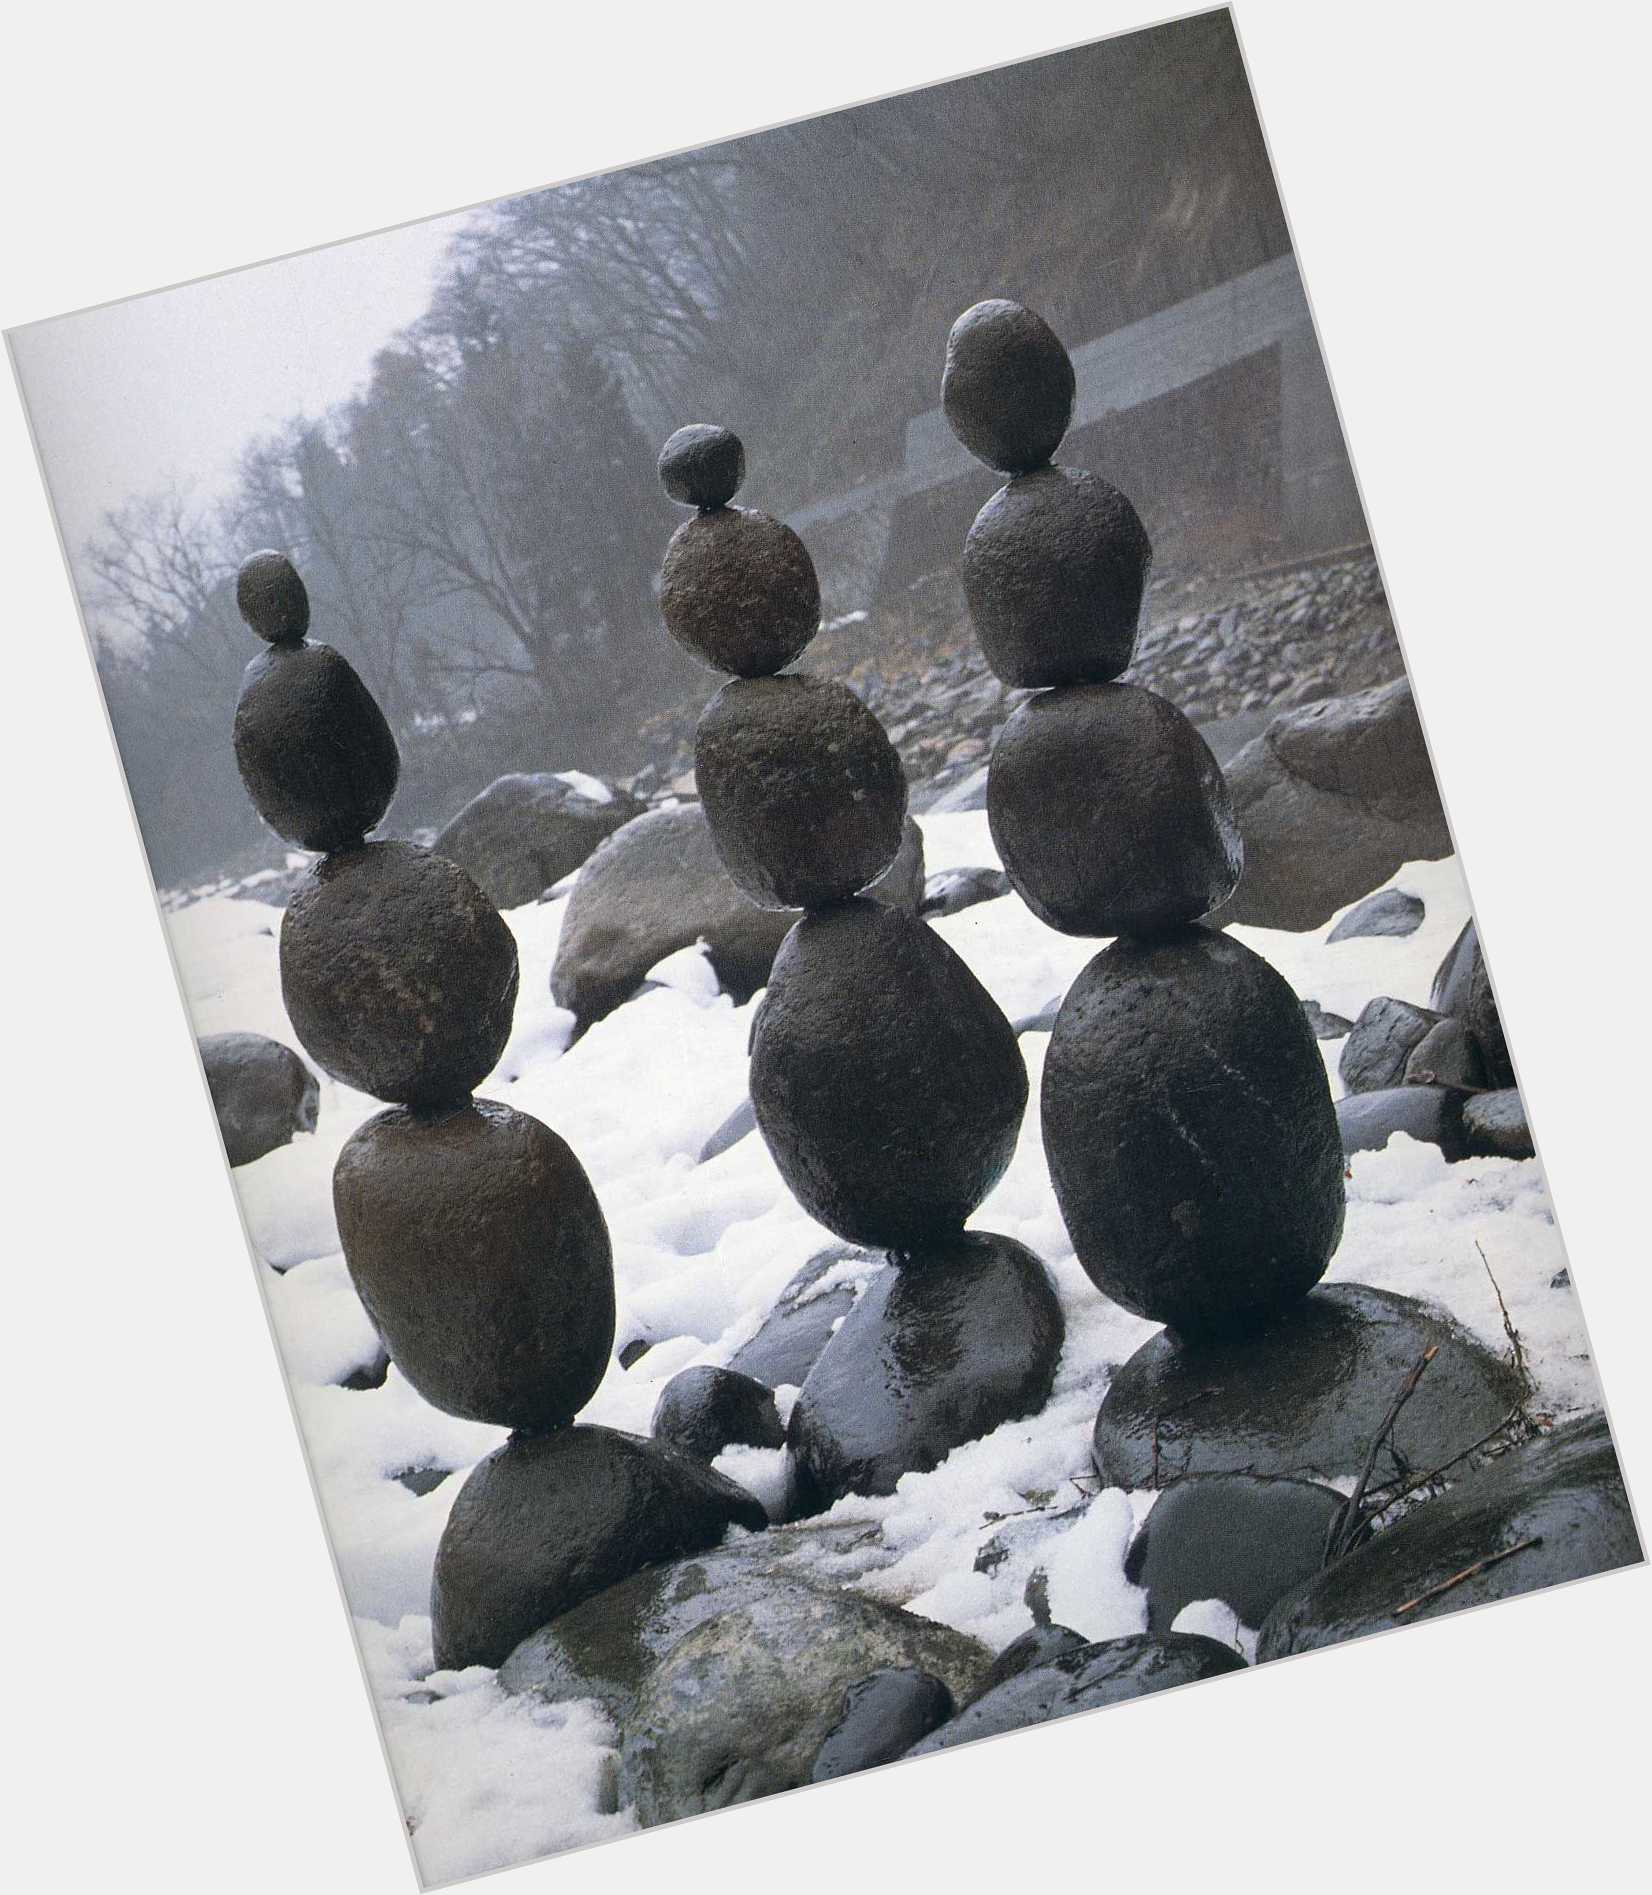 Https://fanpagepress.net/m/A/Andy Goldsworthy Hairstyle 3